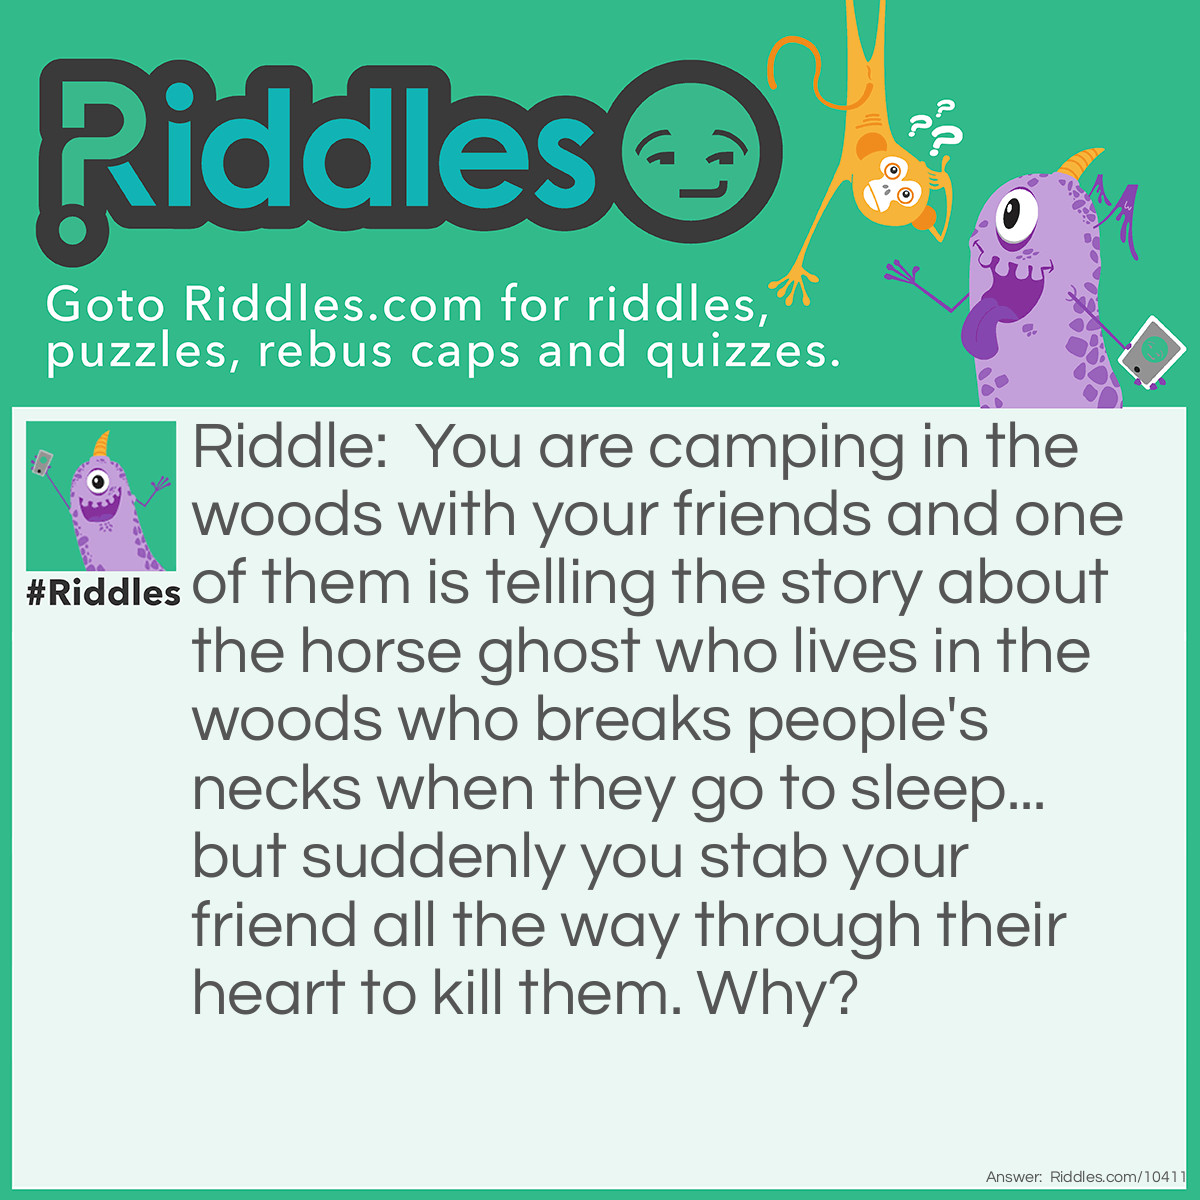 Riddle: You are camping in the woods with your friends and one of them is telling the story about the horse ghost who lives in the woods who breaks people's necks when they go to sleep... but suddenly you stab your friend all the way through their heart to kill them. Why? Answer: YOU are the horse ghost (but only secretly) and you do not want your friend to tell the story to your other friends in case they find out that you are the horse ghost. (You are too clever to break your friend's neck this time because that would be incrementing!)